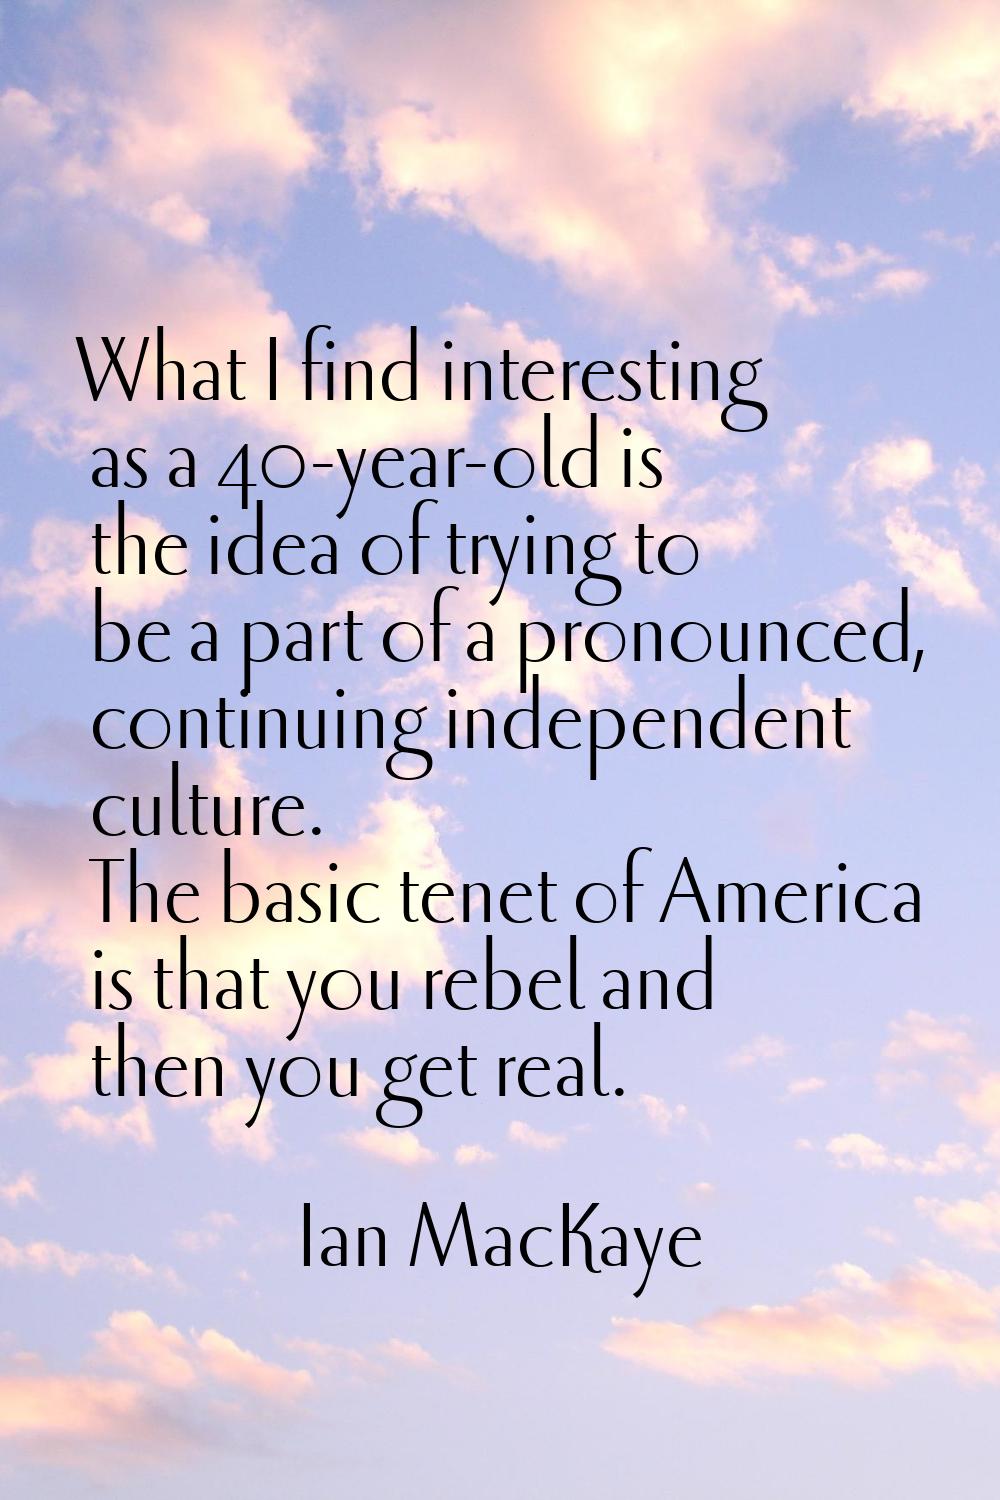 What I find interesting as a 40-year-old is the idea of trying to be a part of a pronounced, contin